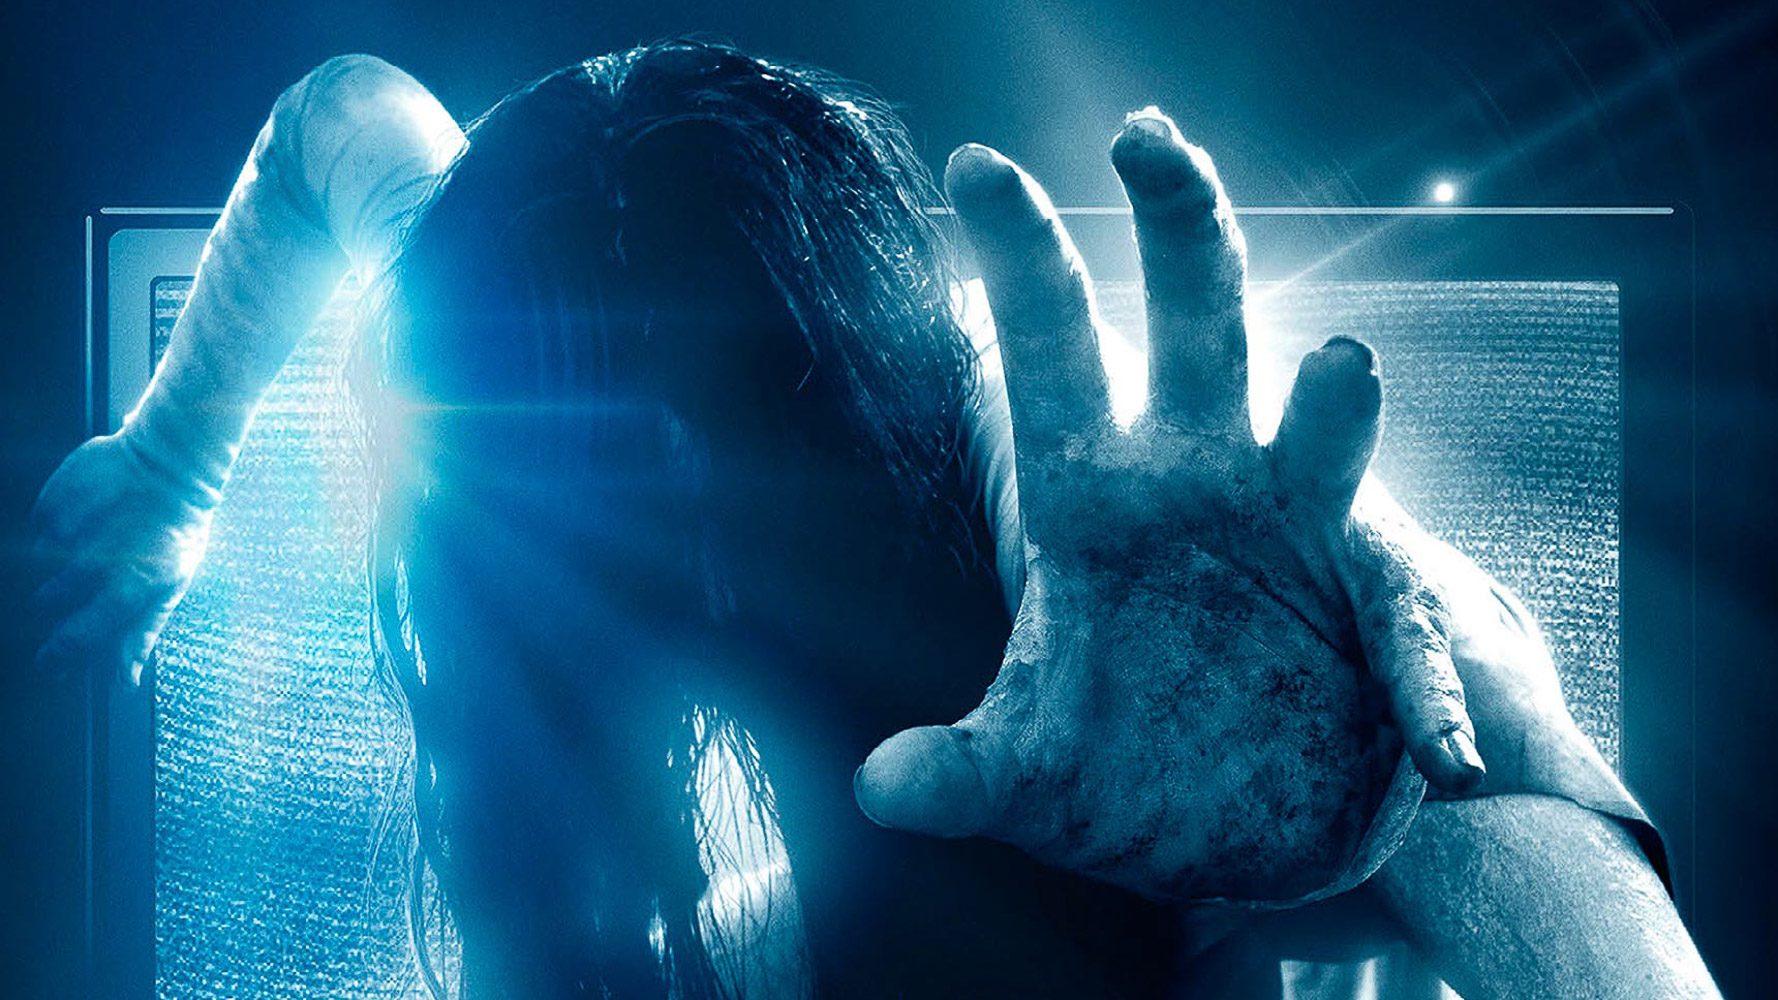 ‘Rings’ Review: A tedious and monotonous rehash